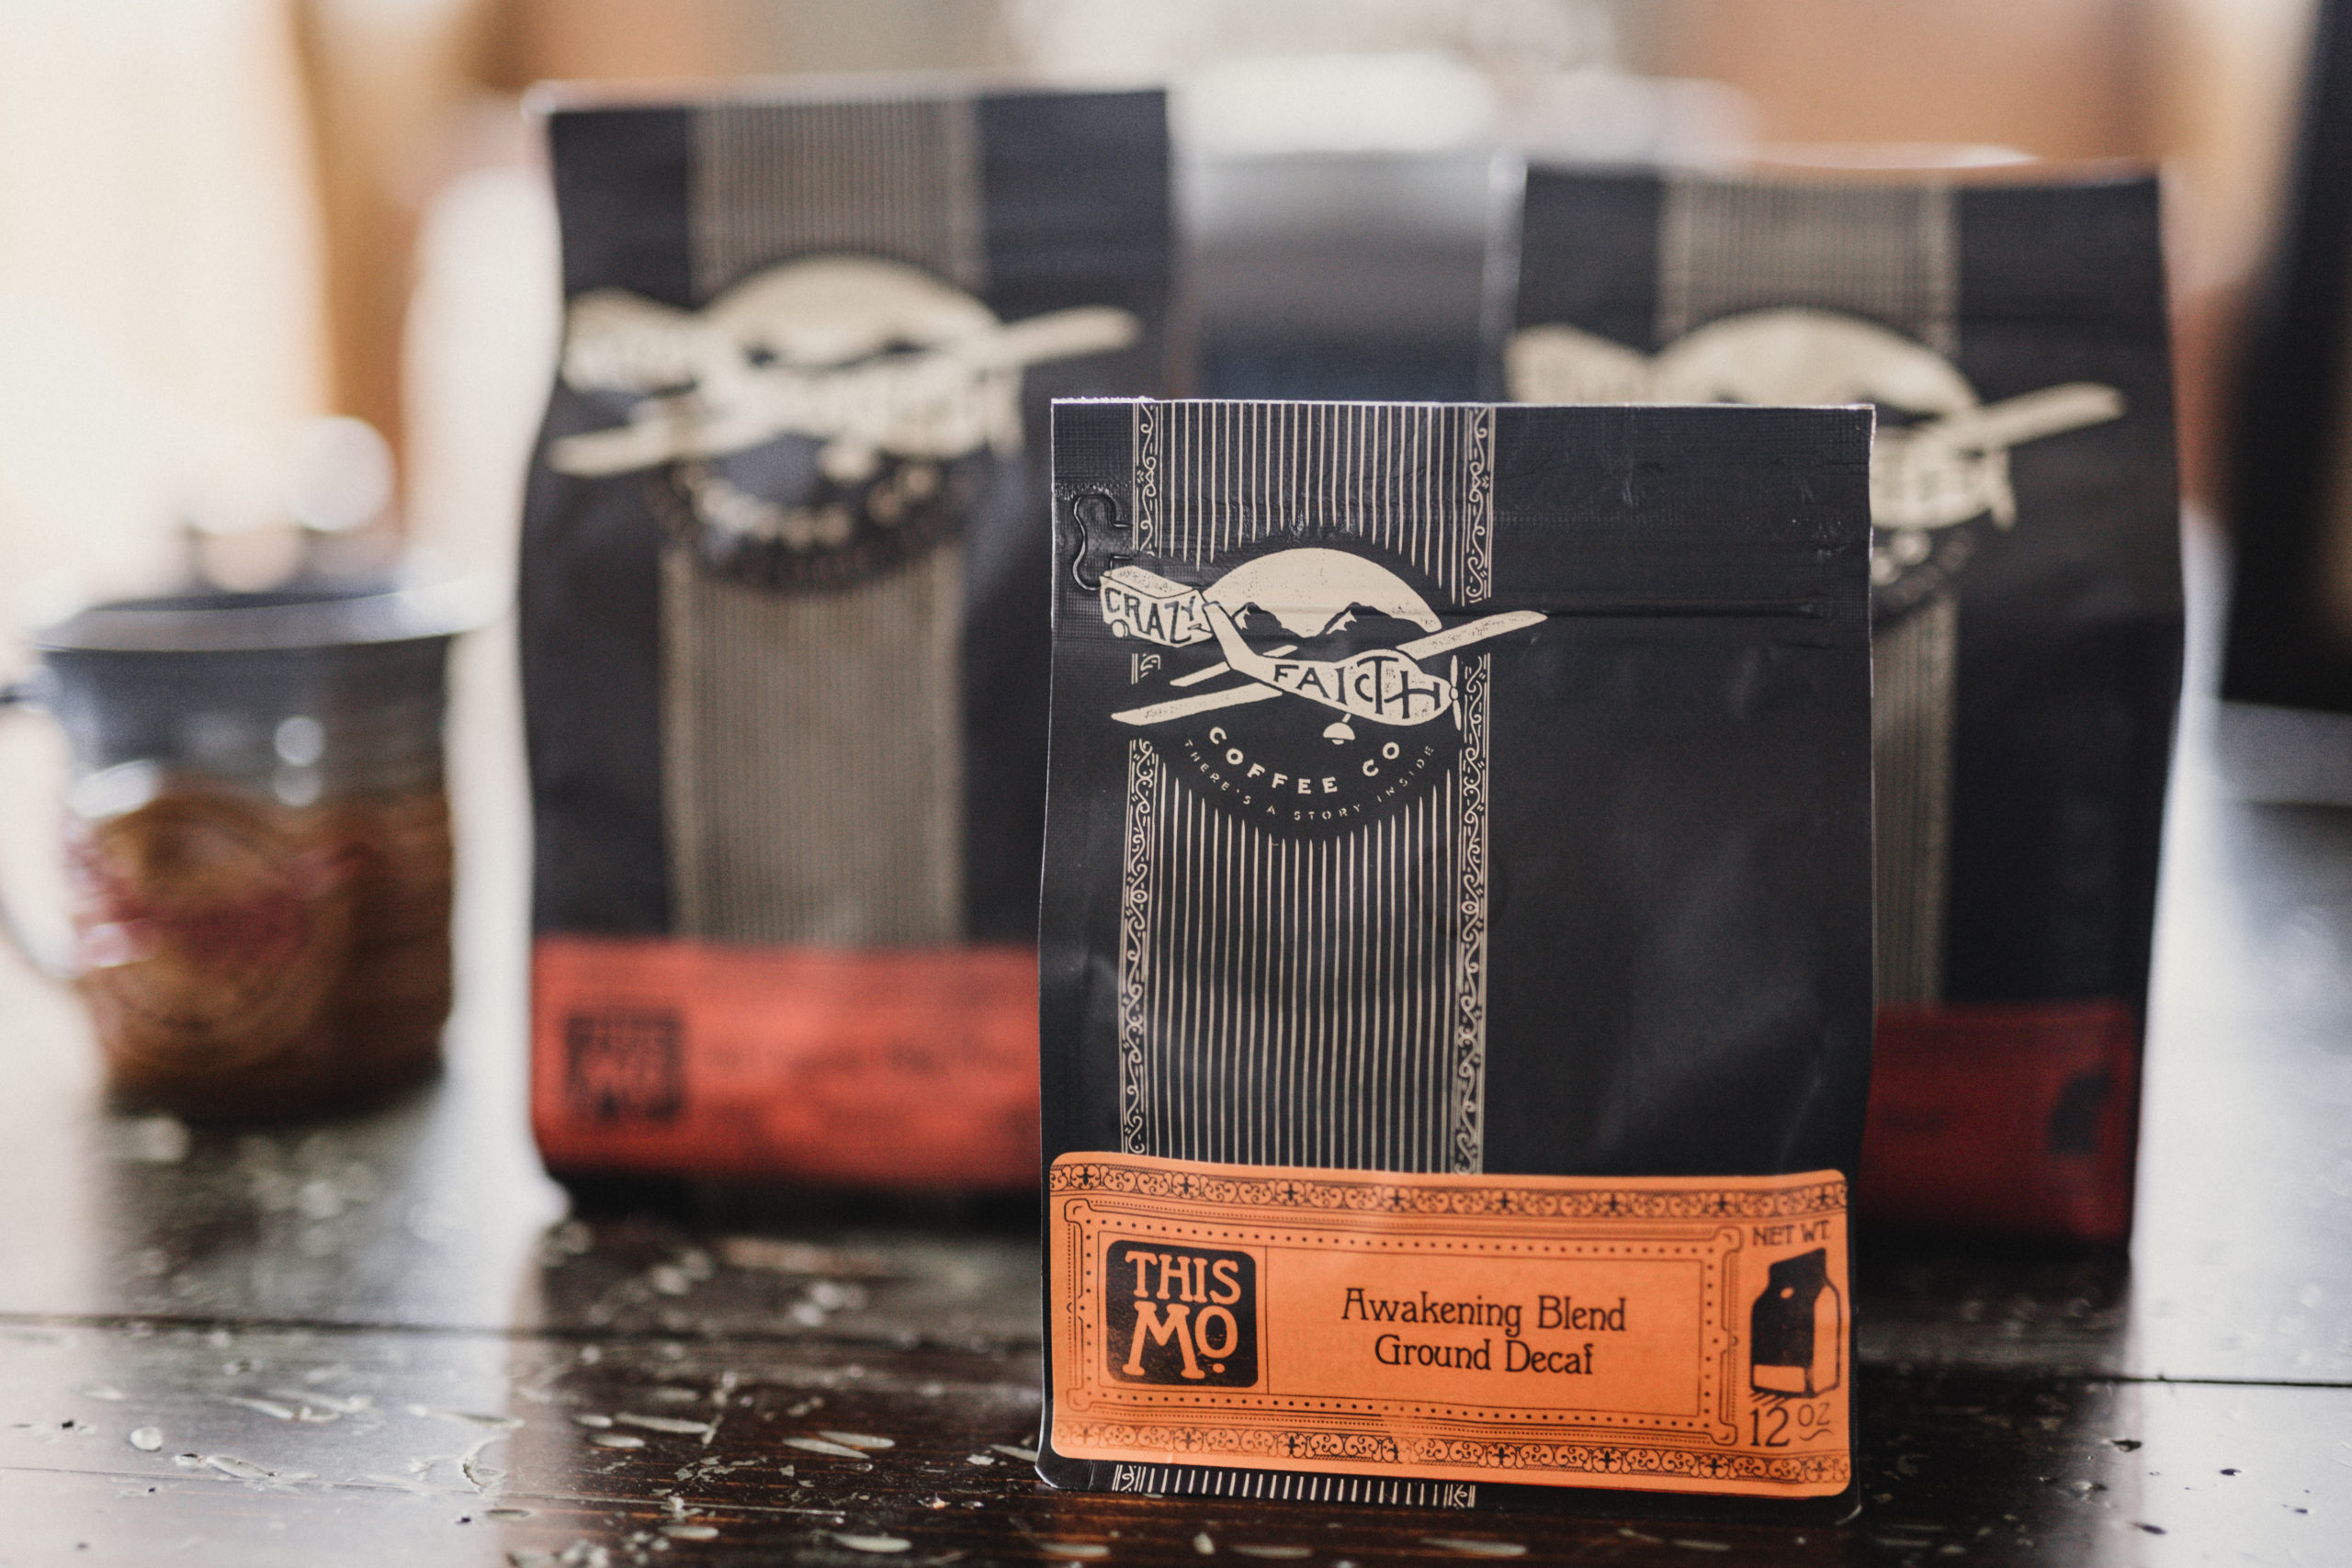 Packages of Crazy Faith coffee grounds with Awakening Blend Ground Decal blend in the foreground with a brown and blue coffee cup nearby